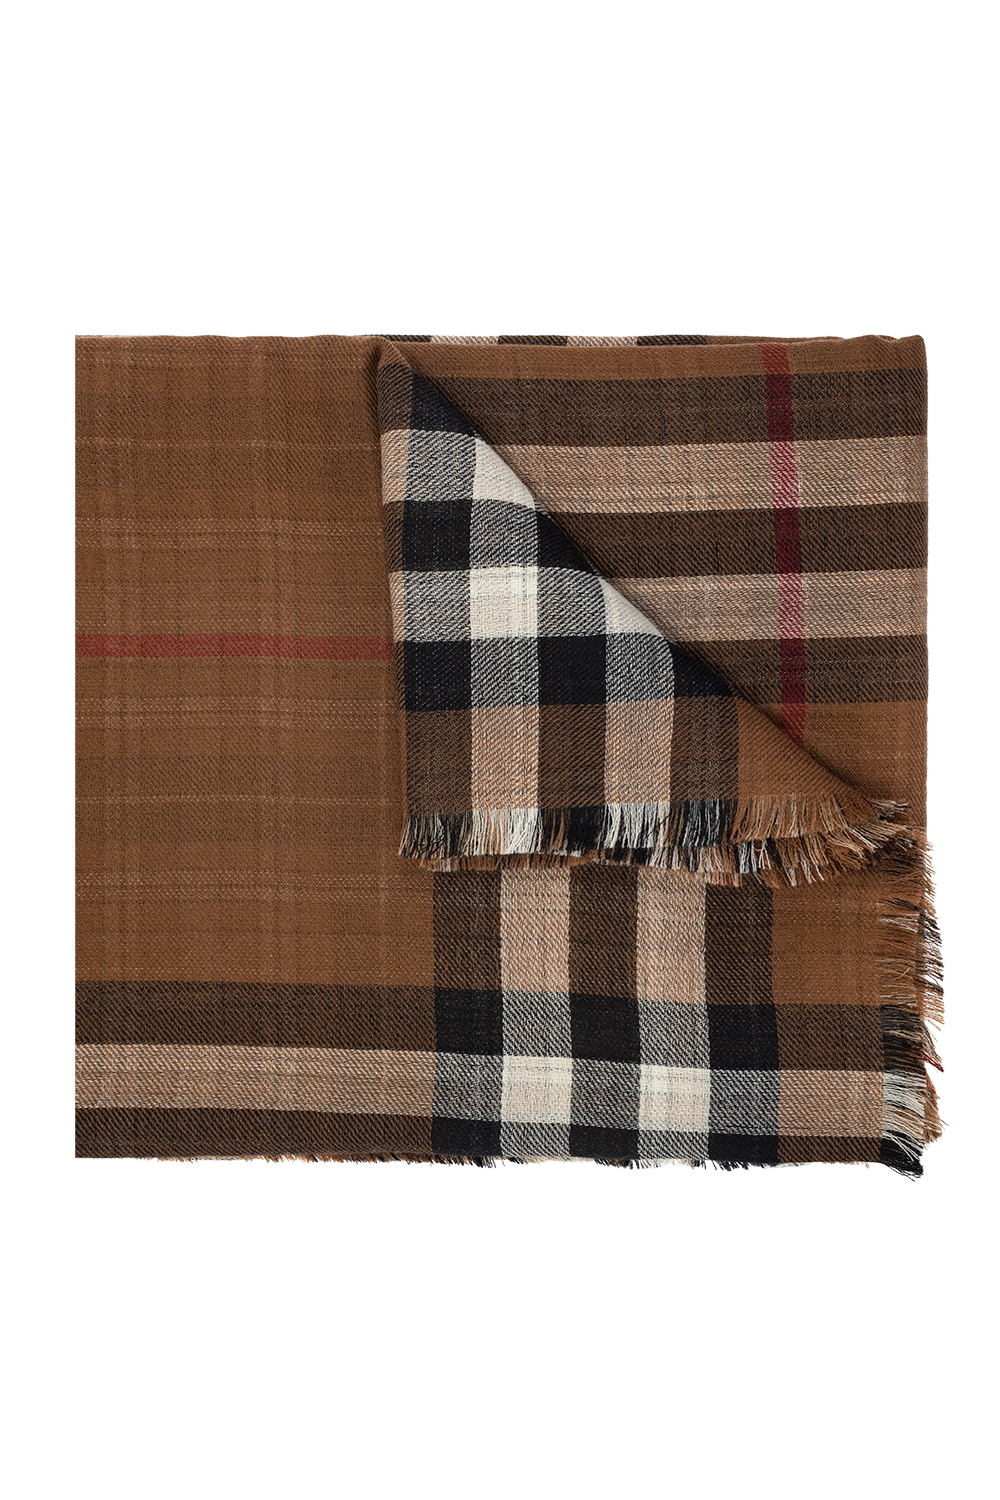 Burberry Check Patterned Cashmere Scarf in Black